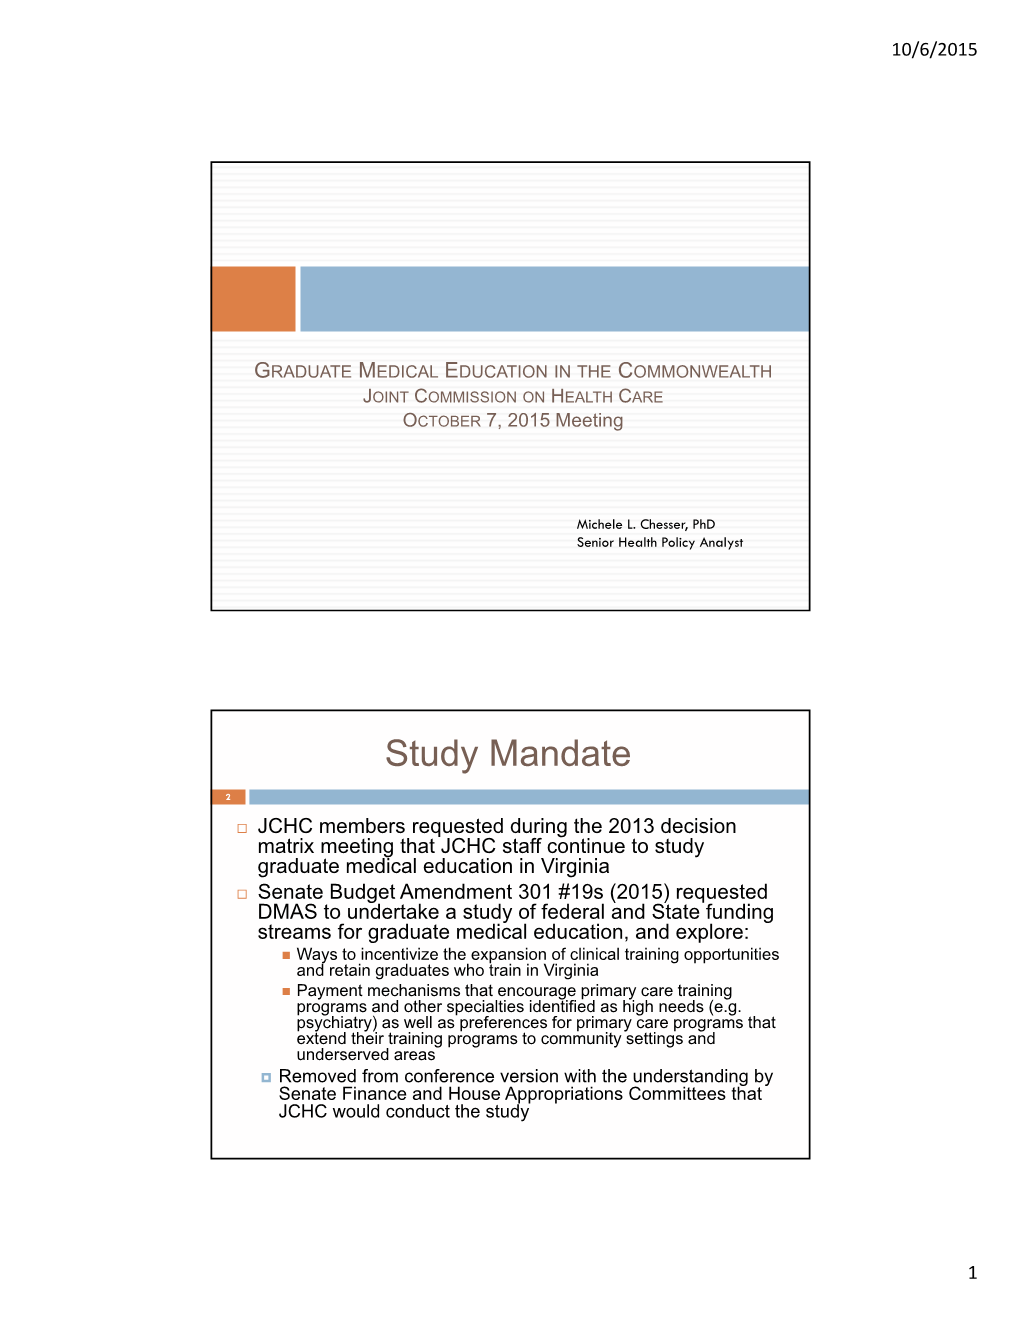 Download Joint Commission on Health Care Study on GME in Virginia